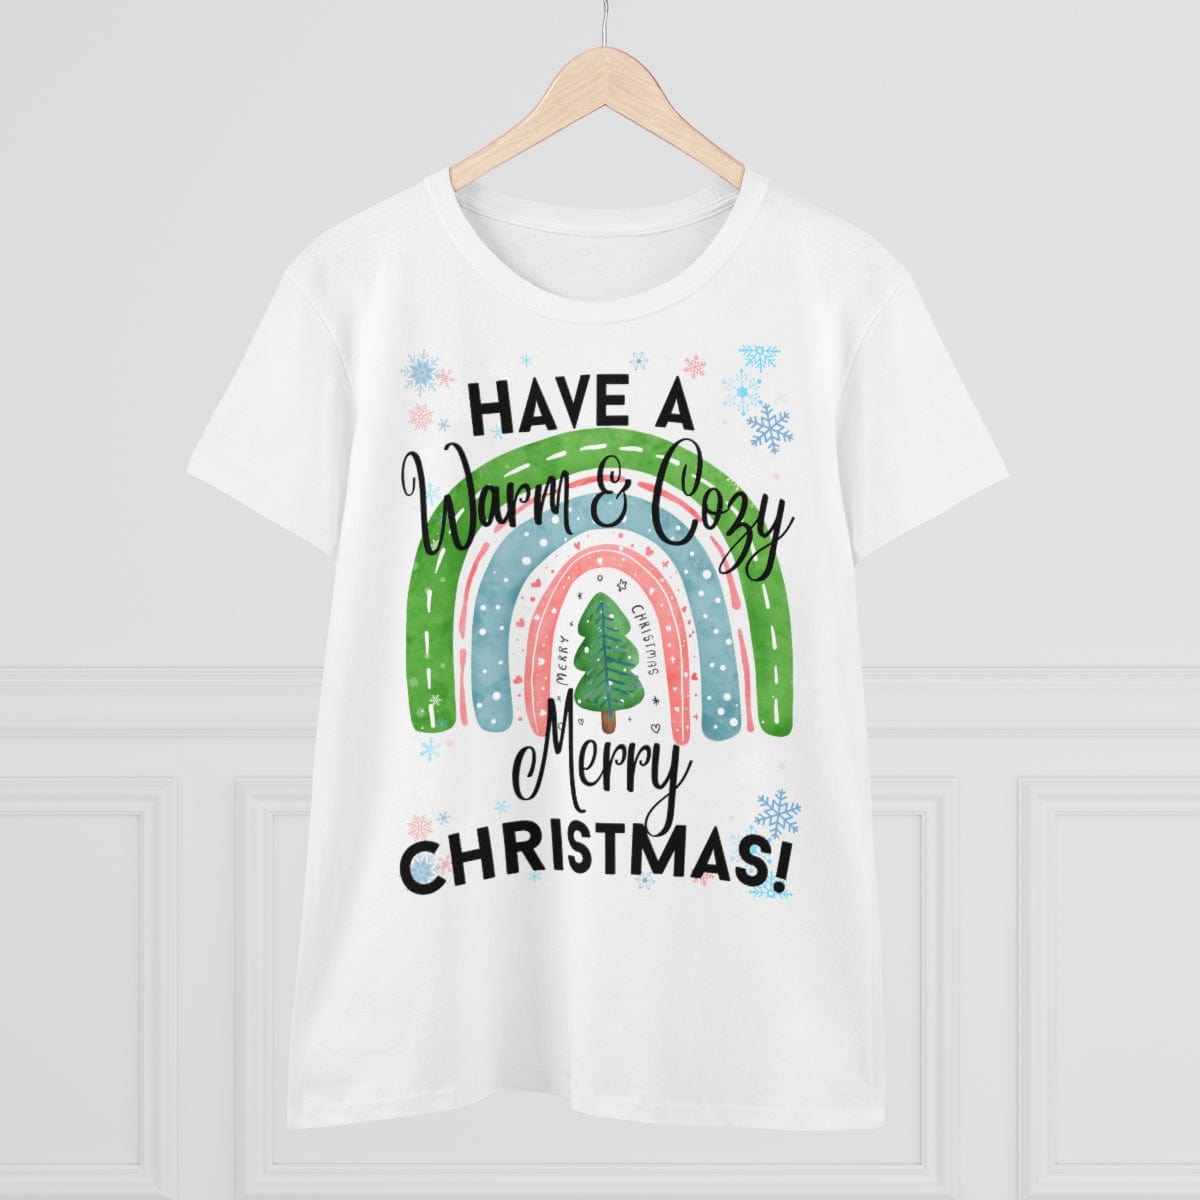 Printify T-Shirt Women's Midweight Cotton Tee *Have a Warm & Cozy Merry Christmas!*